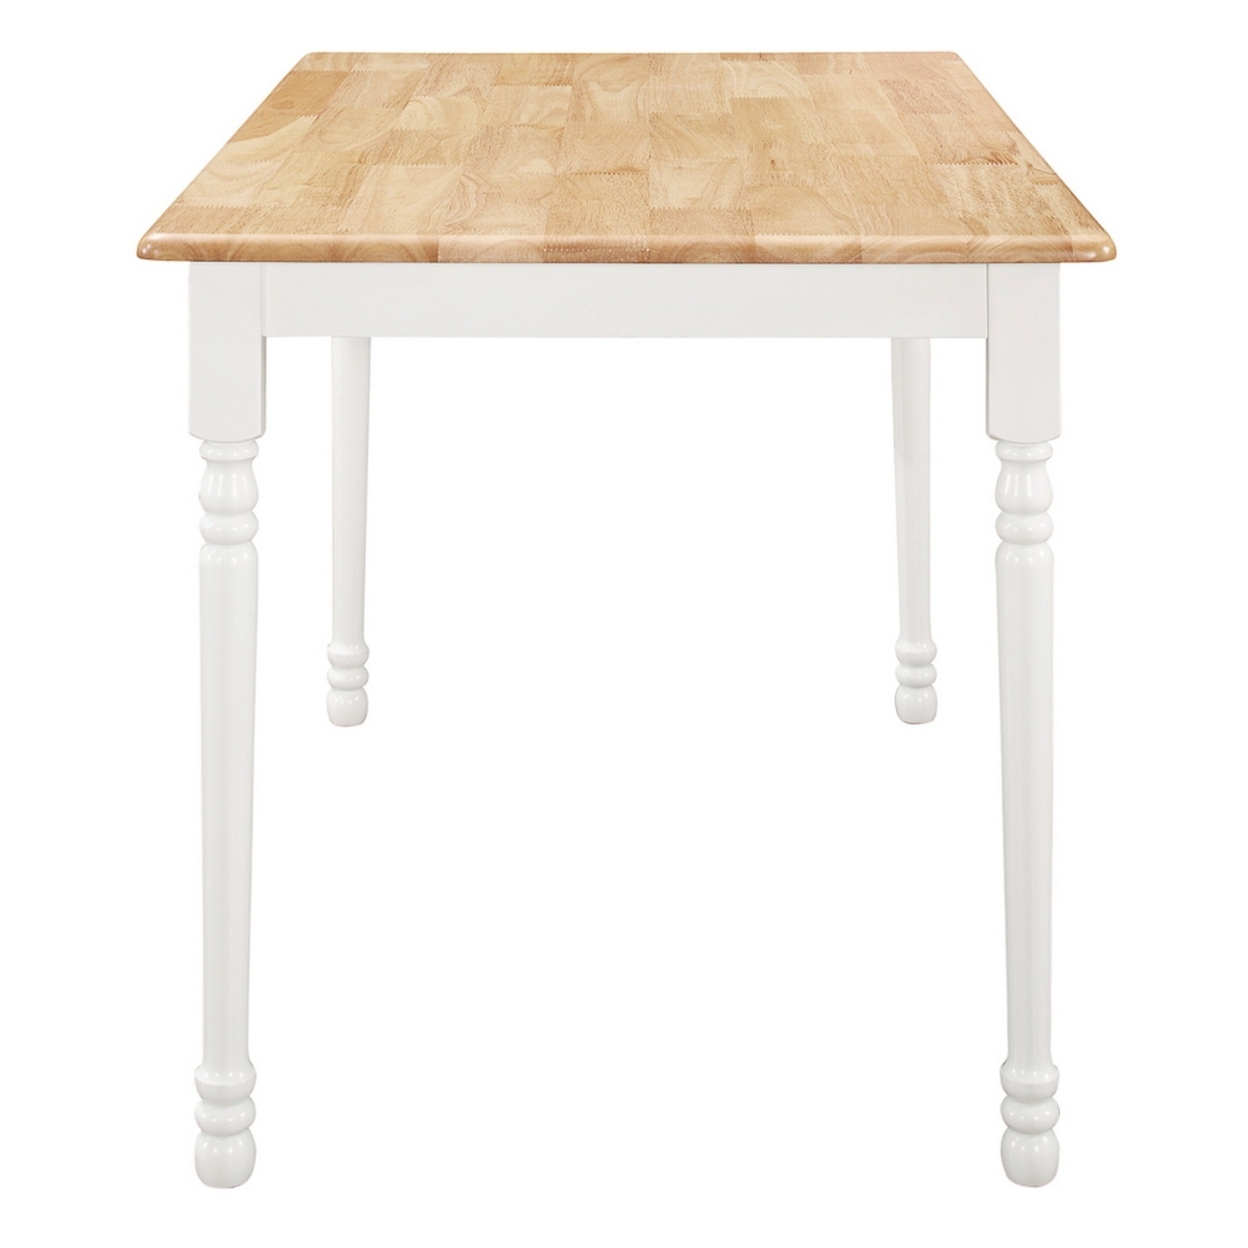 Cottage Style Dining Table With Turned Legs, Natural Brown And White- Saltoro Sherpi